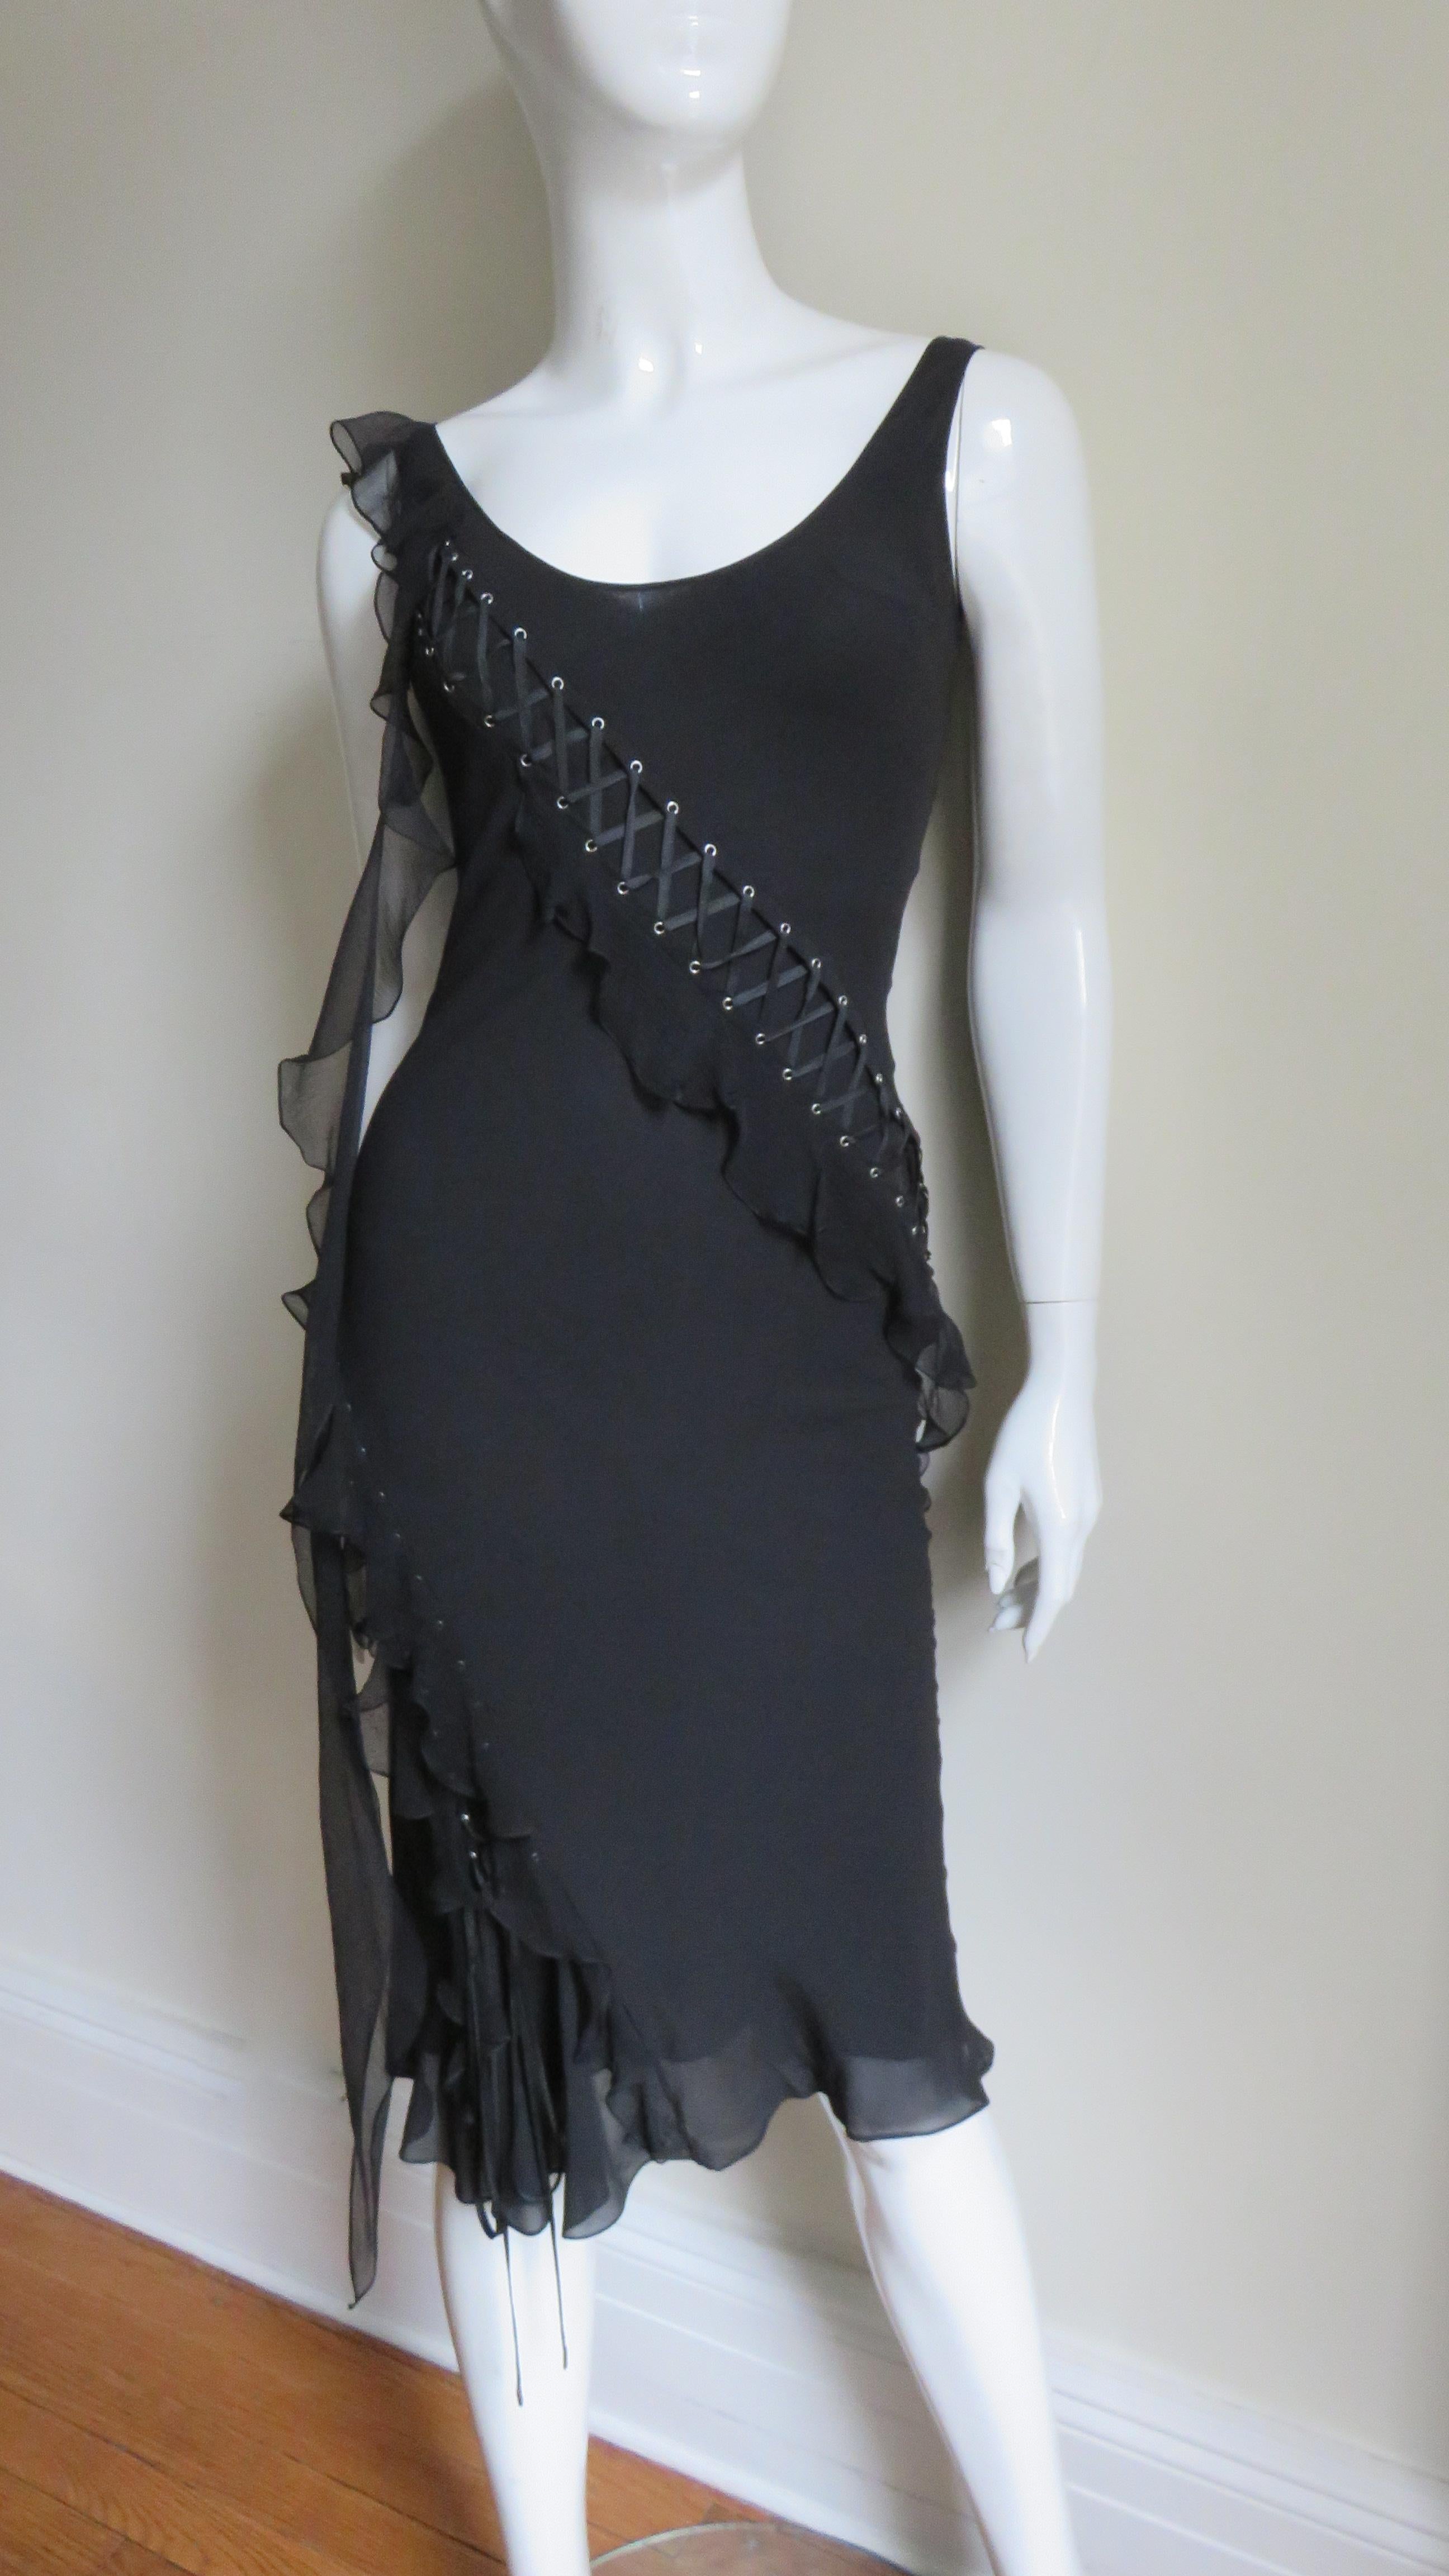 A fabulous black fine silk dress with stretch from Christian Dior.  It has a scoop neck front and back with intricate lacing starting at one shoulder crossing the front and back wrapping around the hips to the hem.  A sheer silk ruffle follows the